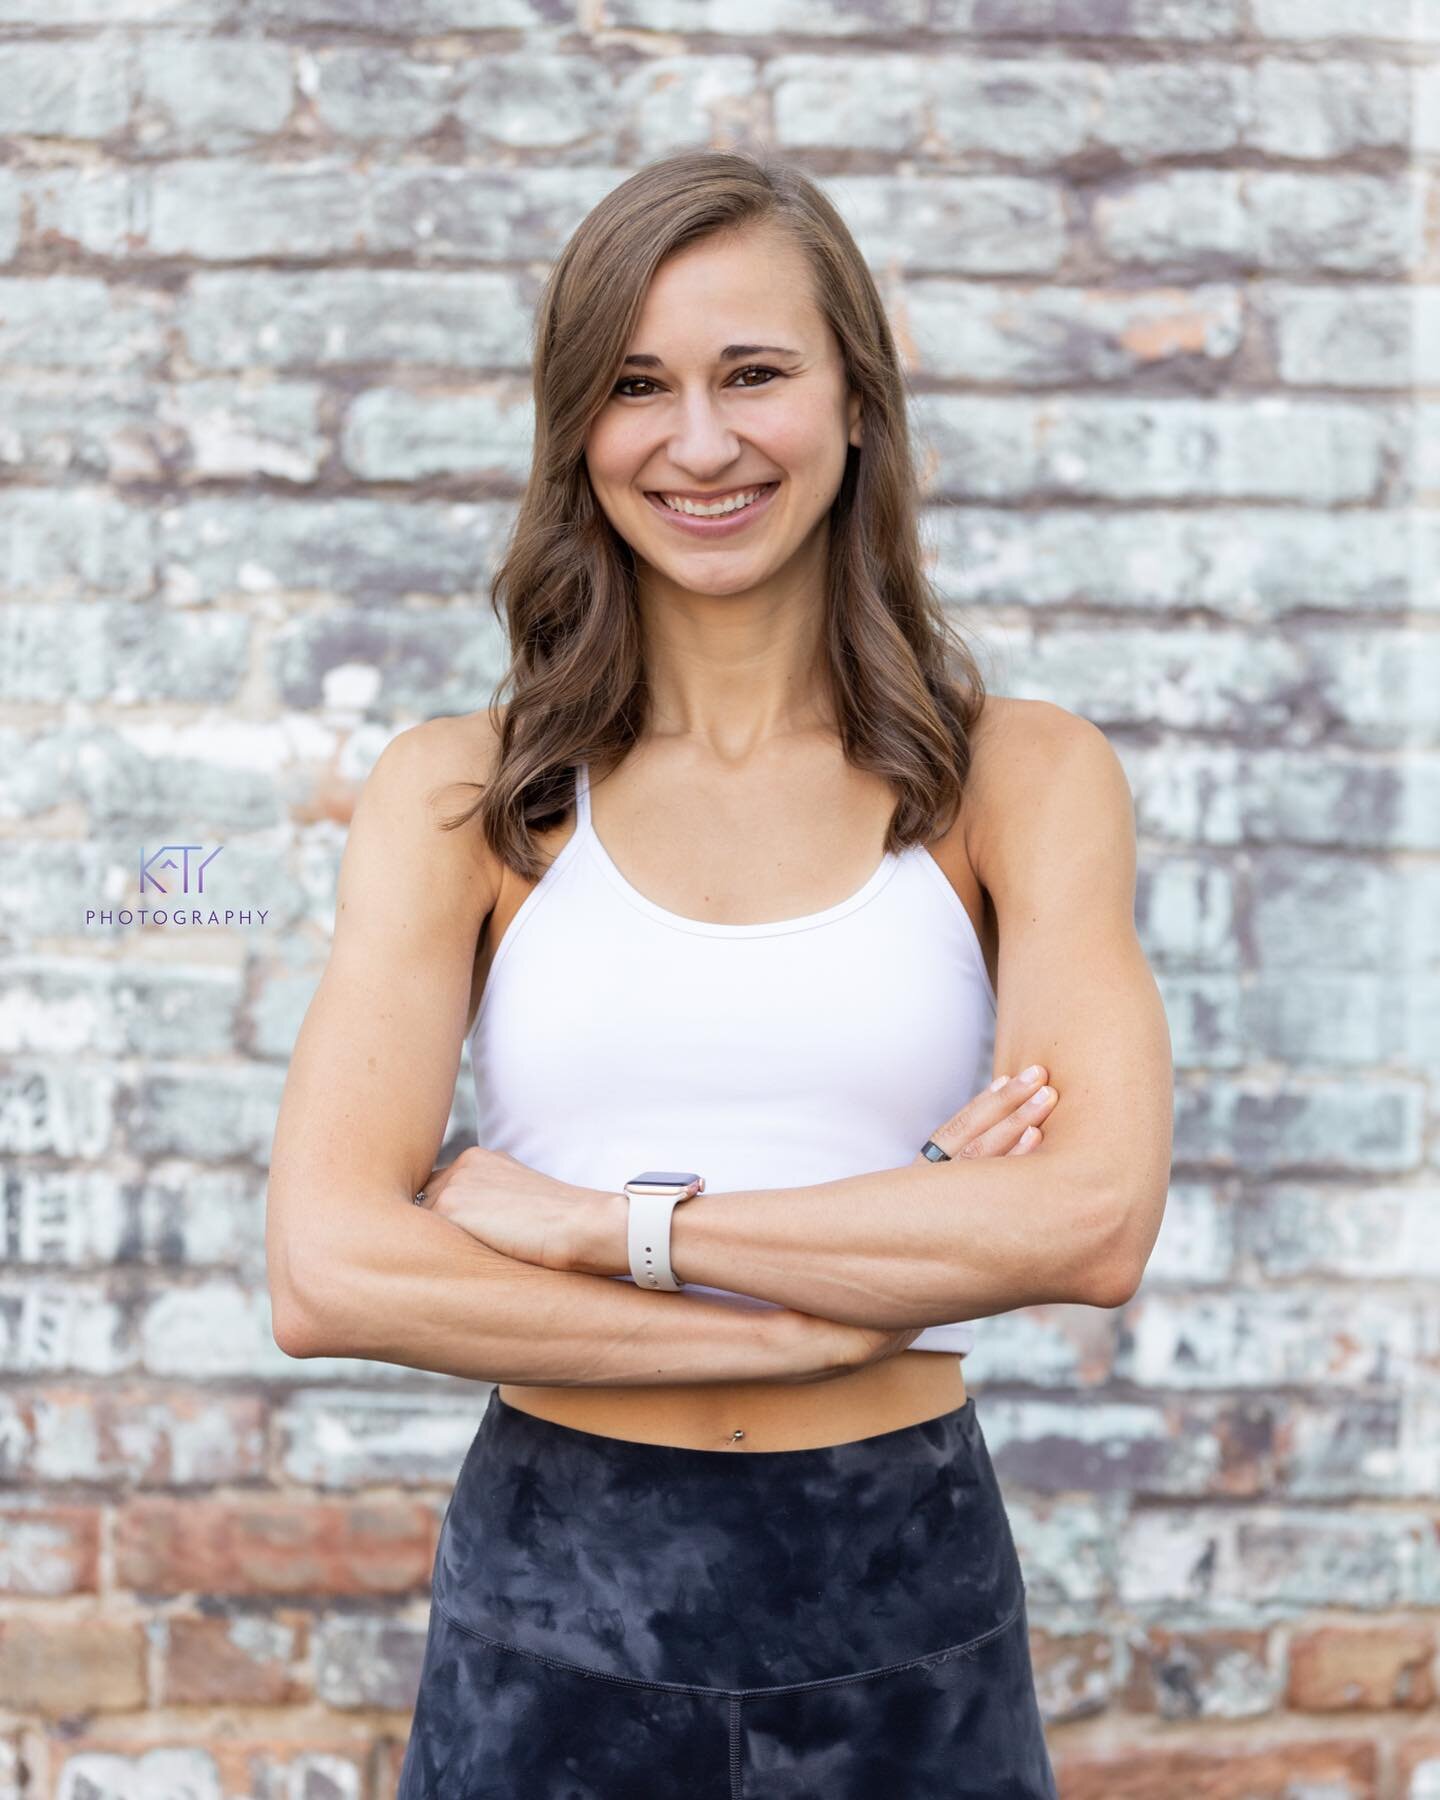 I recently worked with Christina to capture lifestyle fitness photos for her personal training business. Stay tuned for more from her shoot in downtown Wheaton. #fitnessmodel #fitnessphotography #fitnessphotographer #fitnessprofessional #personaltrai